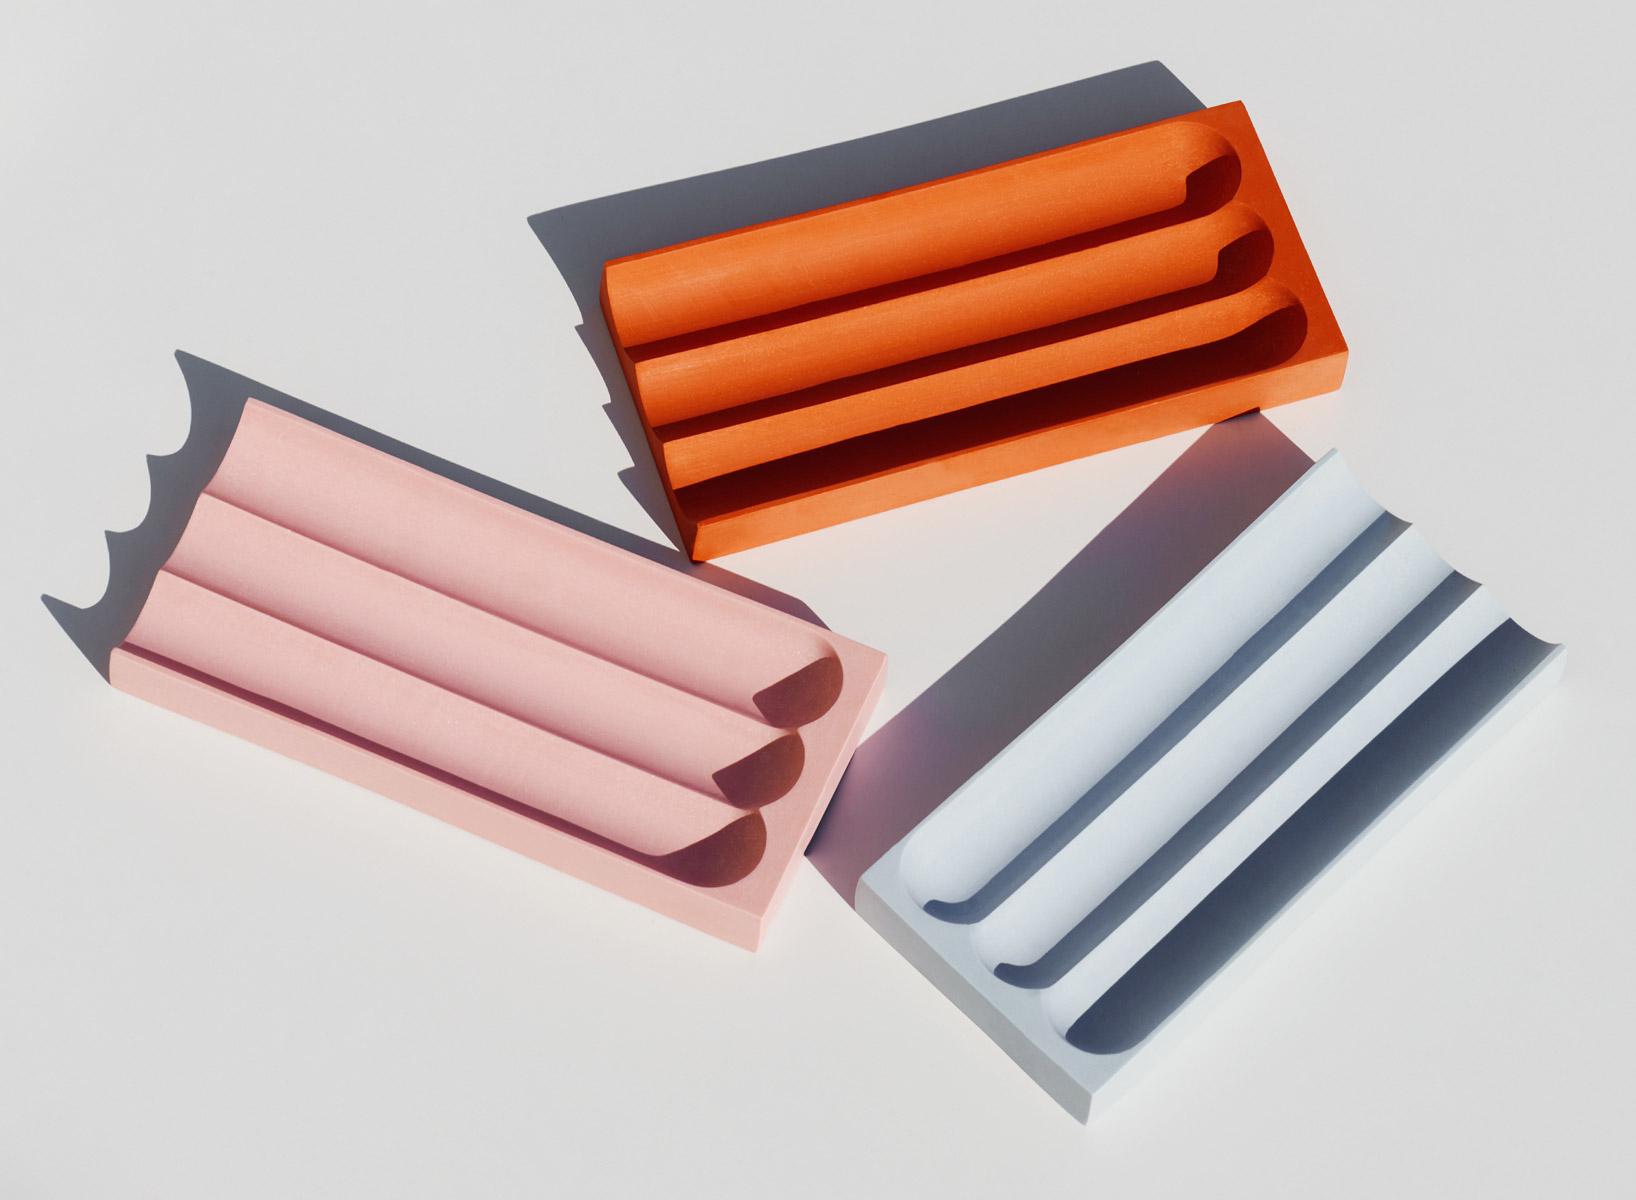 The Flute Pencil Tray is made from cast pigmented and sanded Jesmonite and evolves from Tino Seubert's tubular motif developed in his Monolithic Font for Wallpaper* Handmade 2017. The happy colour trays brighten and organise any desk space.